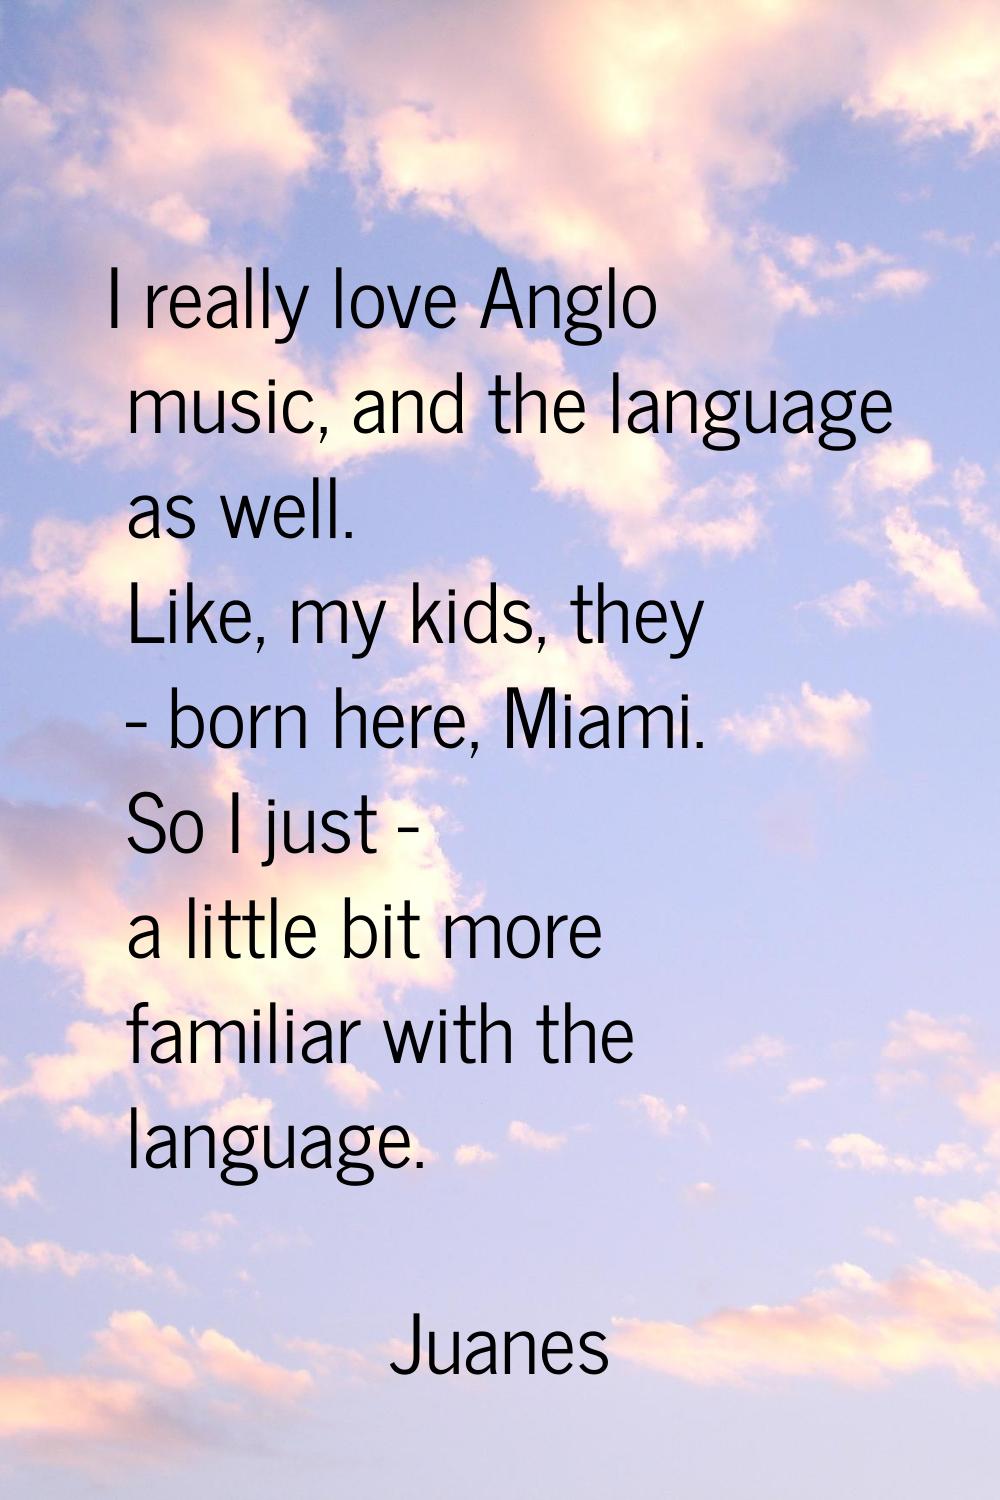 I really love Anglo music, and the language as well. Like, my kids, they - born here, Miami. So I j